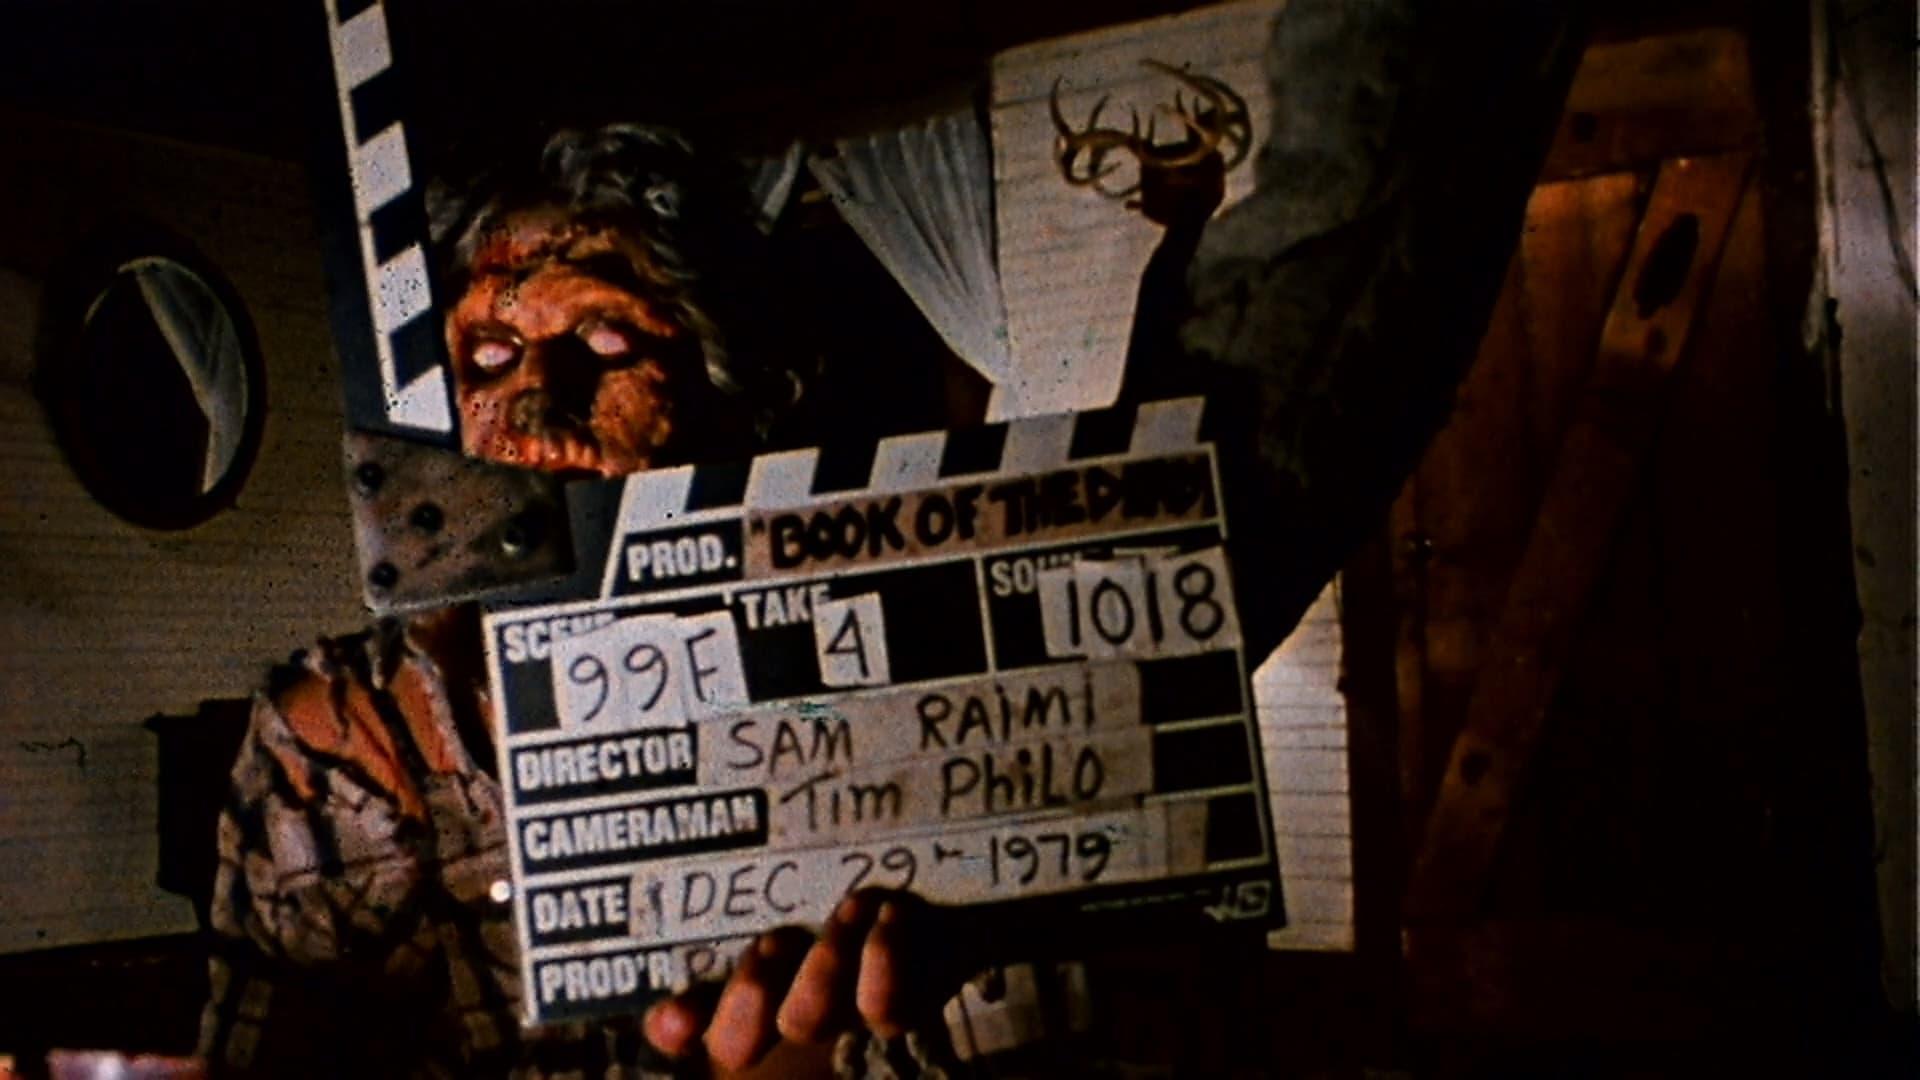 The Evil Dead: Treasures from the Cutting Room Floor backdrop